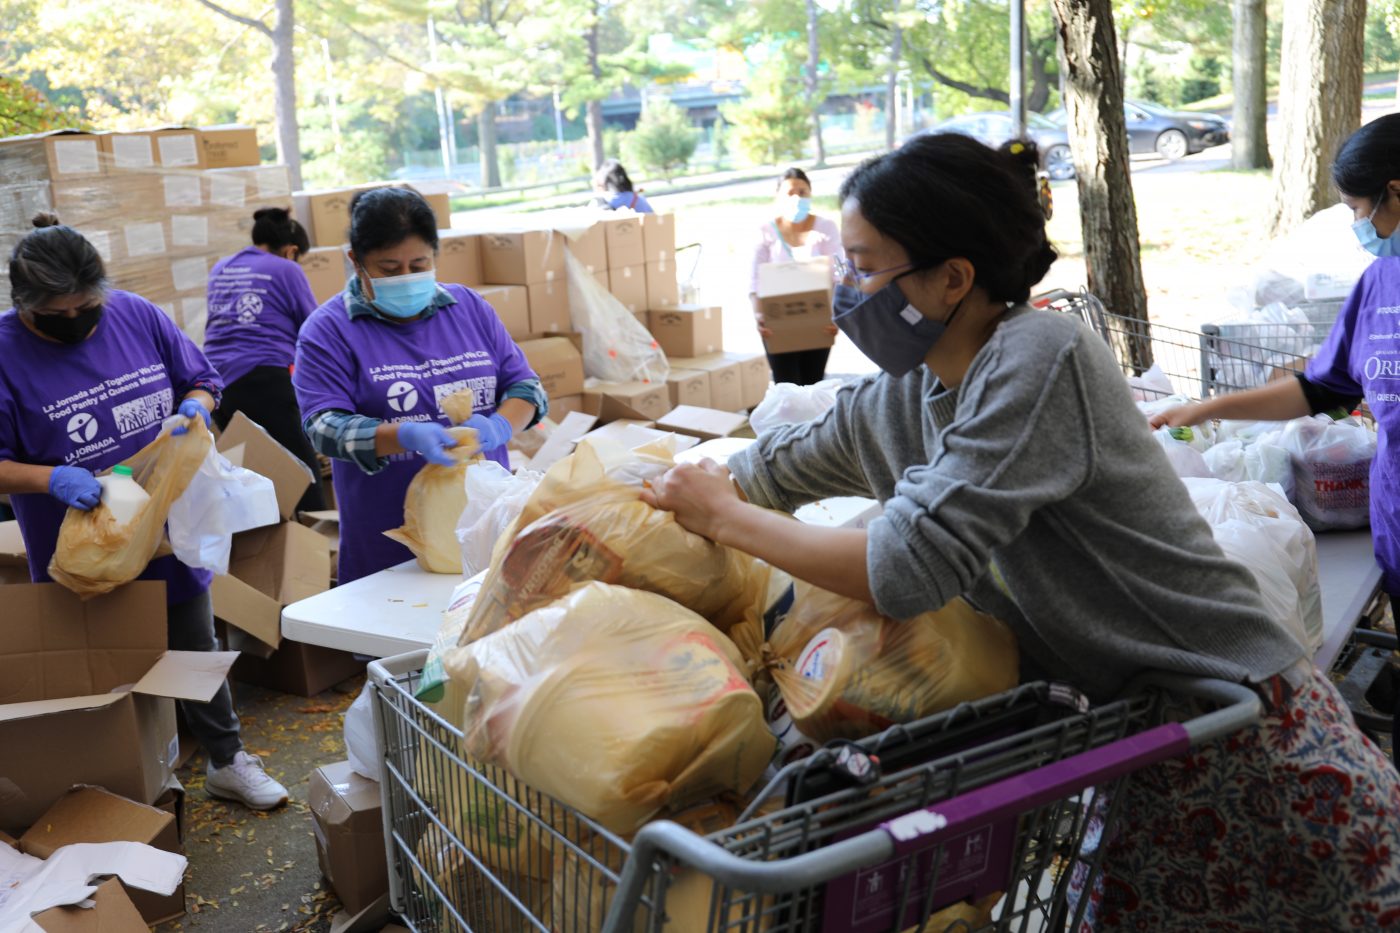 A group of women of color, work together to sort through a tower of food donation boxes. Most of them are wearing a purple La Jornada volunteer shirt. One of them is wearing a gray sweater and is reaching into a shopping cart, overflowing with light brown plastic grocery bags. They are all masked and working outdoors amongst trees.